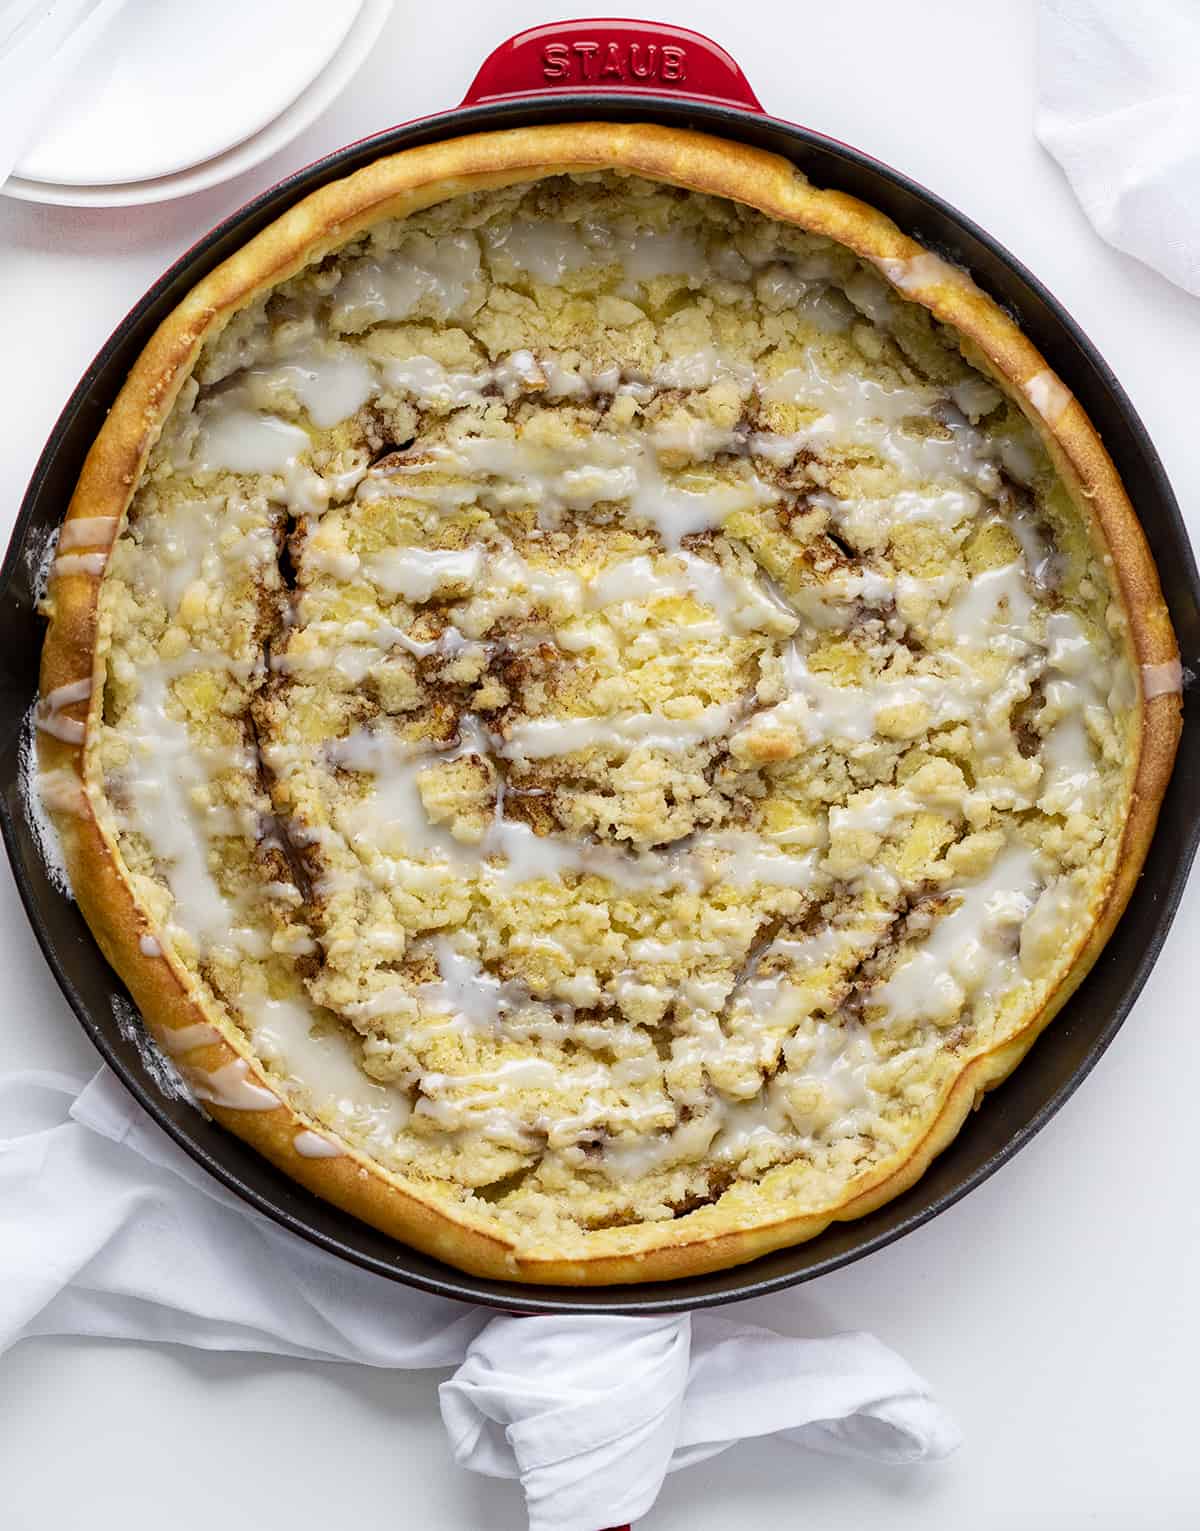 Overhead Image of Cinnamon Sugar Dutch Baby in Skillet on White Counter. Breakfast, Dutch Baby, How to Make Dutch Baby, Easy Breakfast, breakfast recipes, breakfast for guests, i am baker, iambaker.